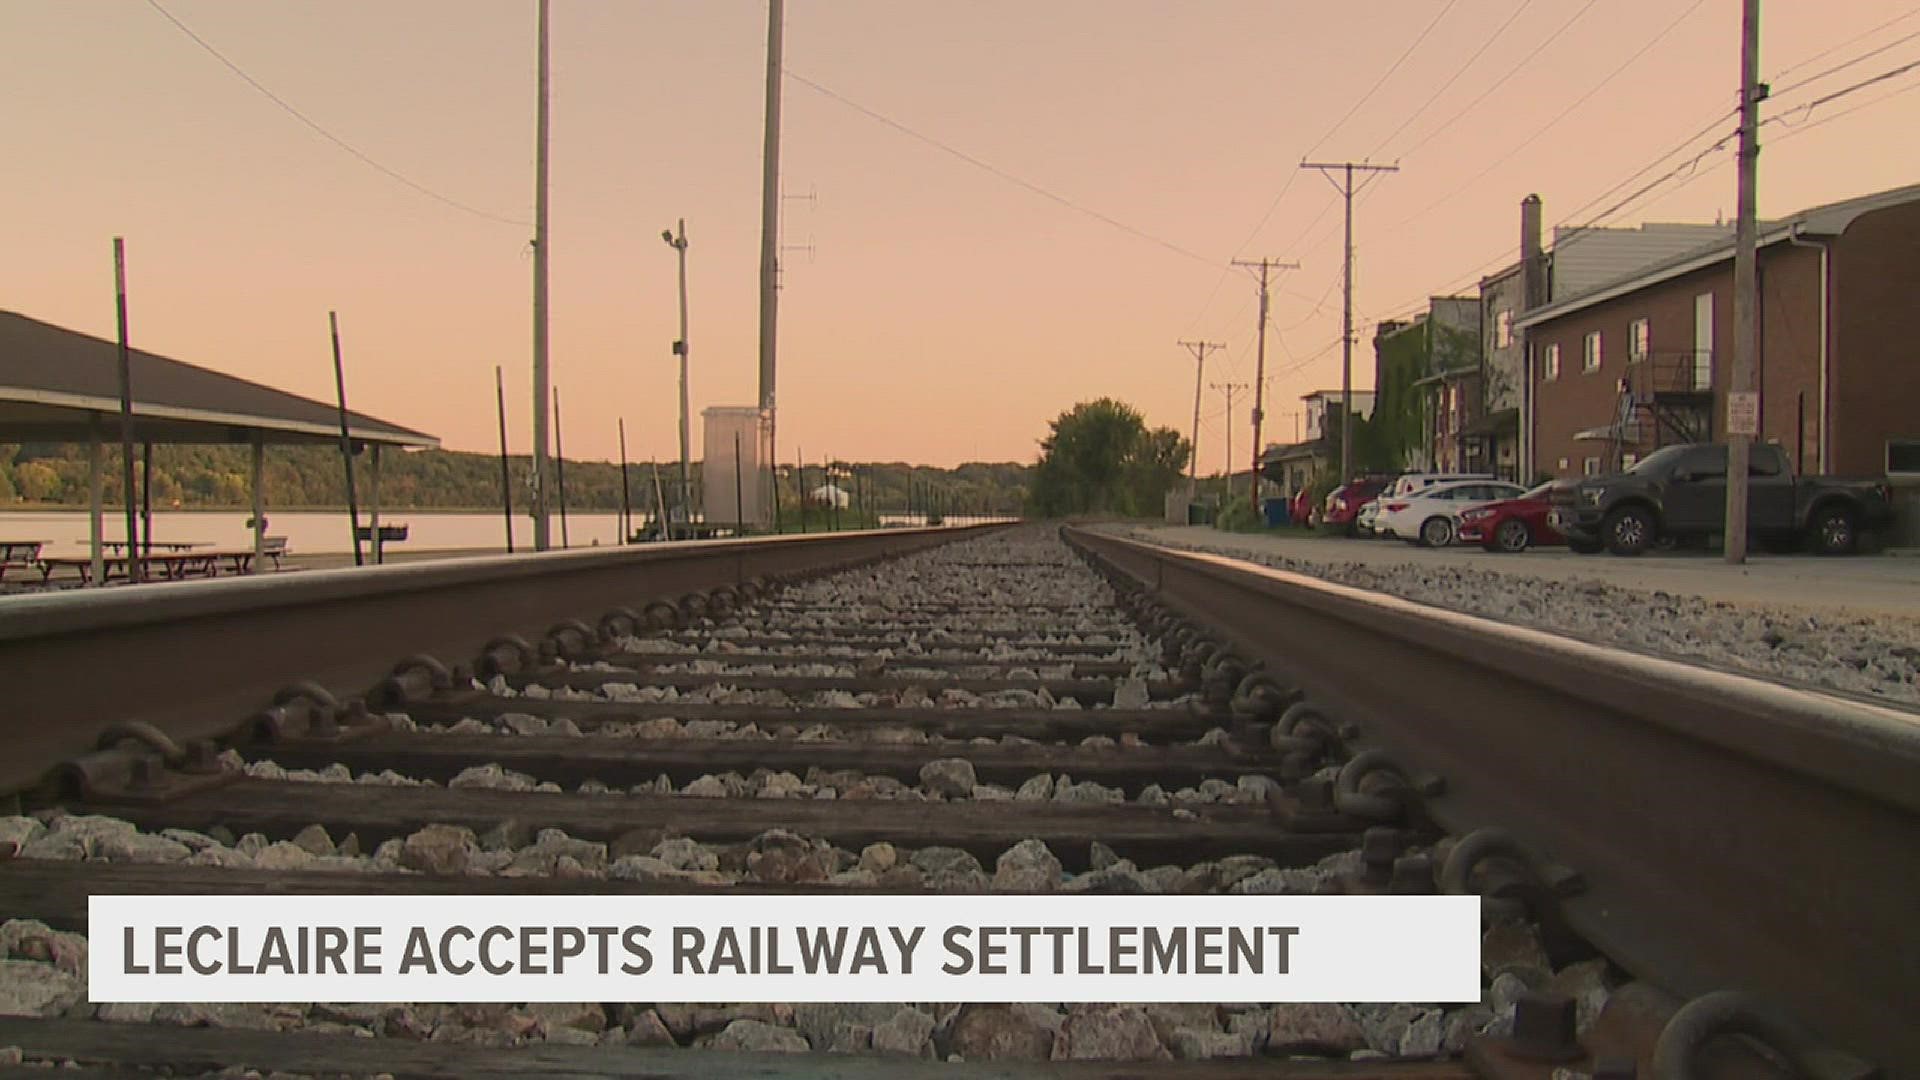 LeClaire's $750,000 settlement is the lowest-priced deal accepted by any of the communities affected by the Canadian Pacific - Kansas City Southern merger.